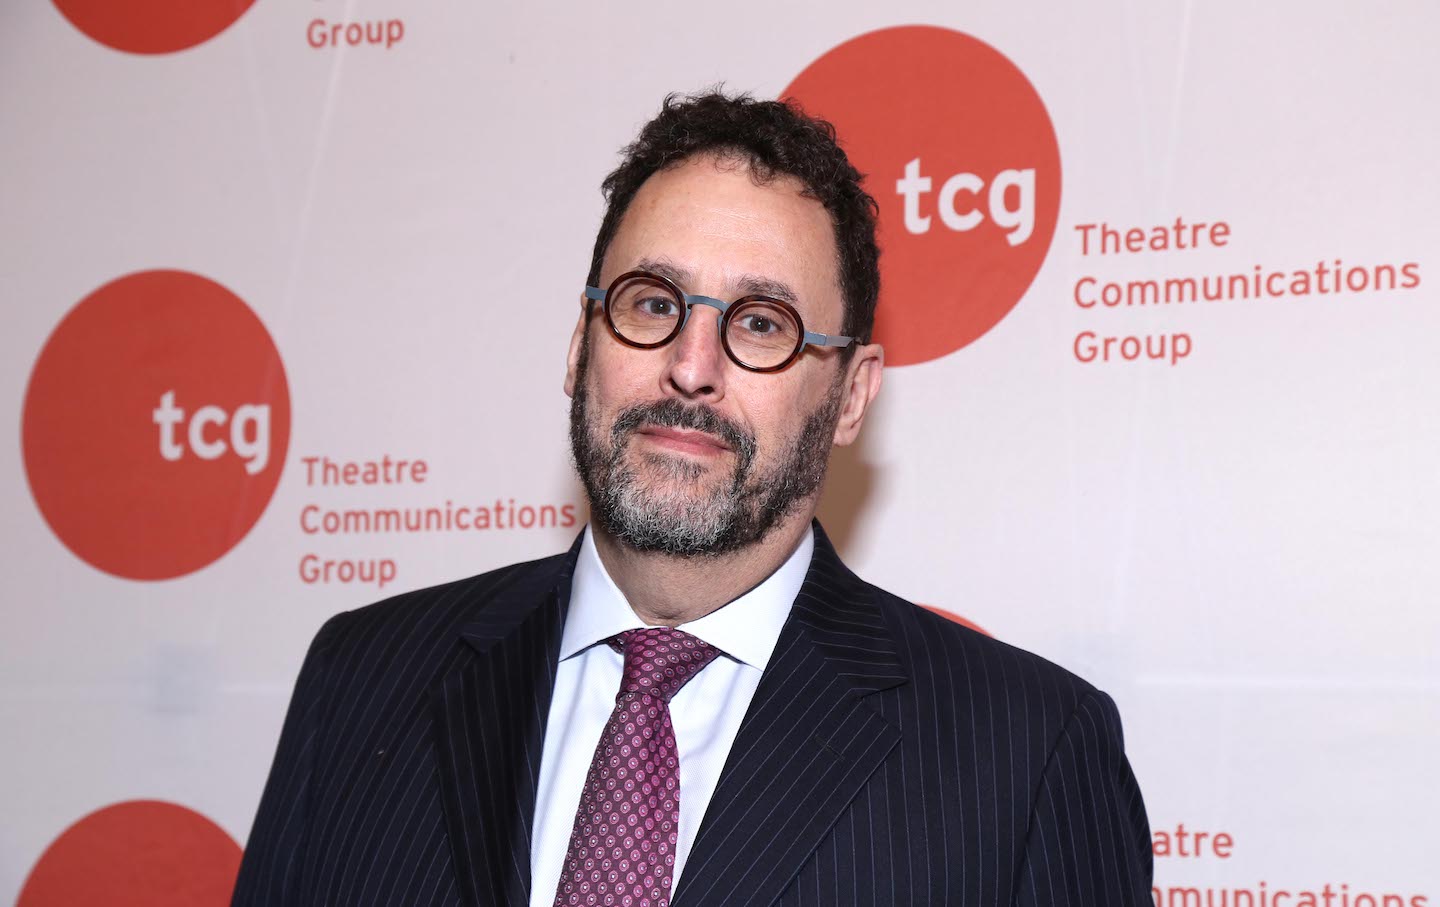 Tony Kushner on Making Serious Political Theatre in 2019